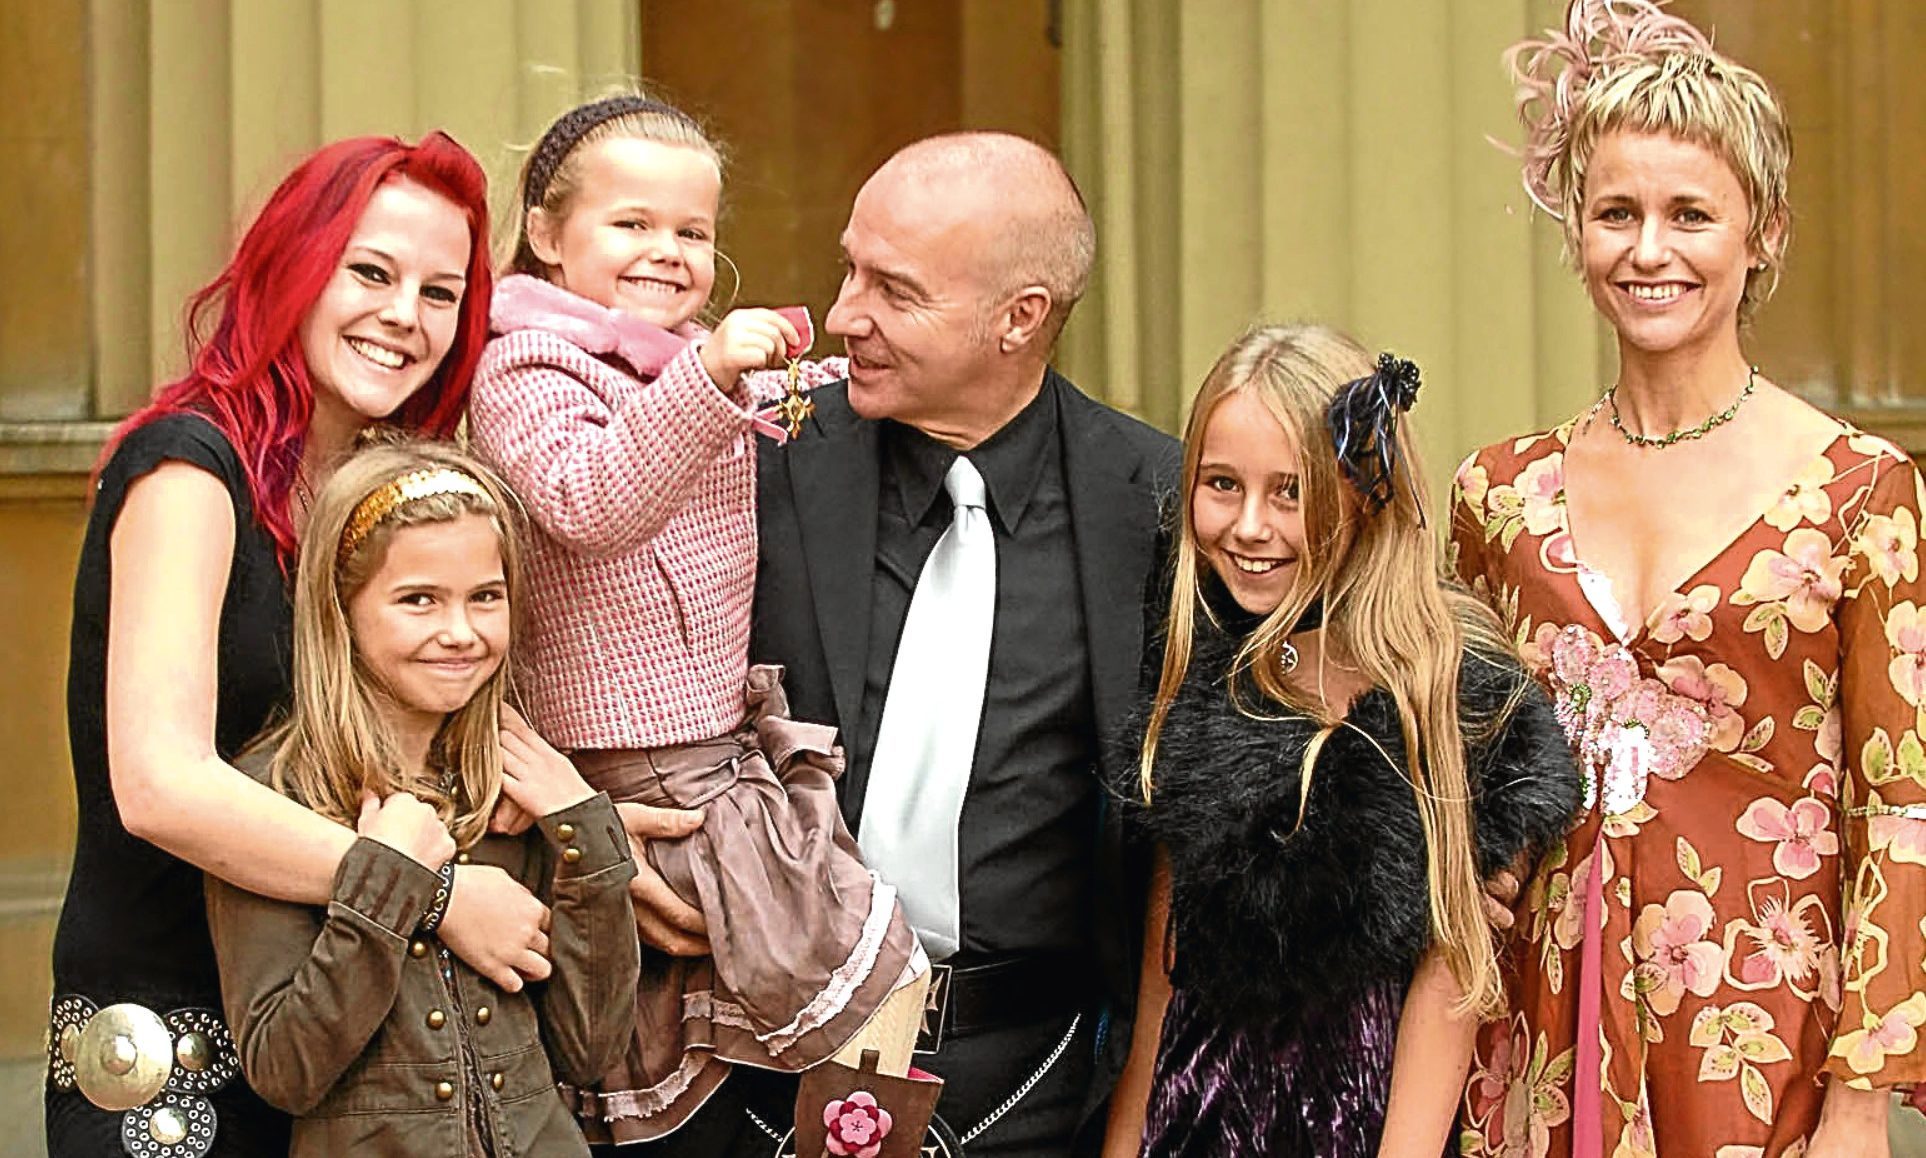 Proud Midge collecting his OBE in 2005 with his wife Sheridan and daughters Molly, Ruby, Flossie and Kitty (Brian Smith / REX / Shutterstock)